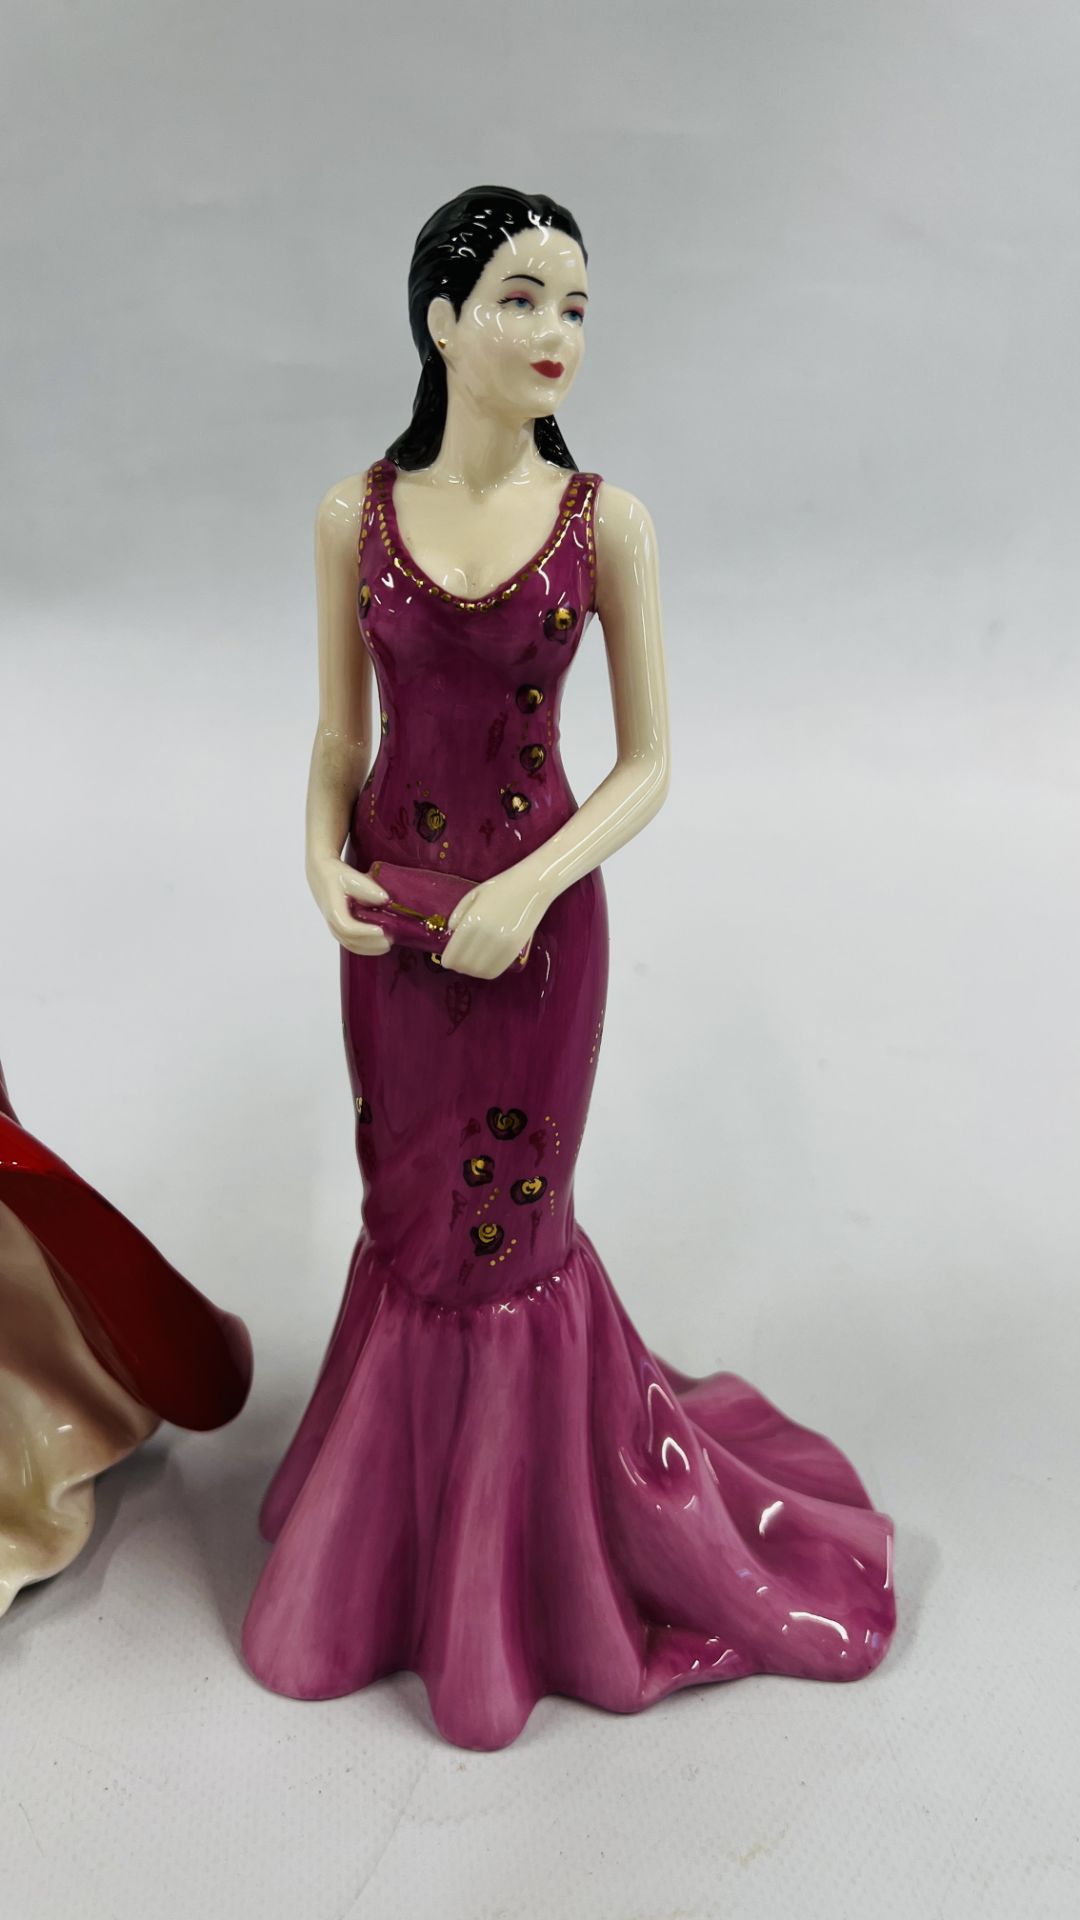 3 ROYAL DOULTON CABINET COLLECTORS FIGURINES TO INCLUDE "NATALIE" HN 5012, LIMITED EDITION 1419/15, - Image 2 of 10